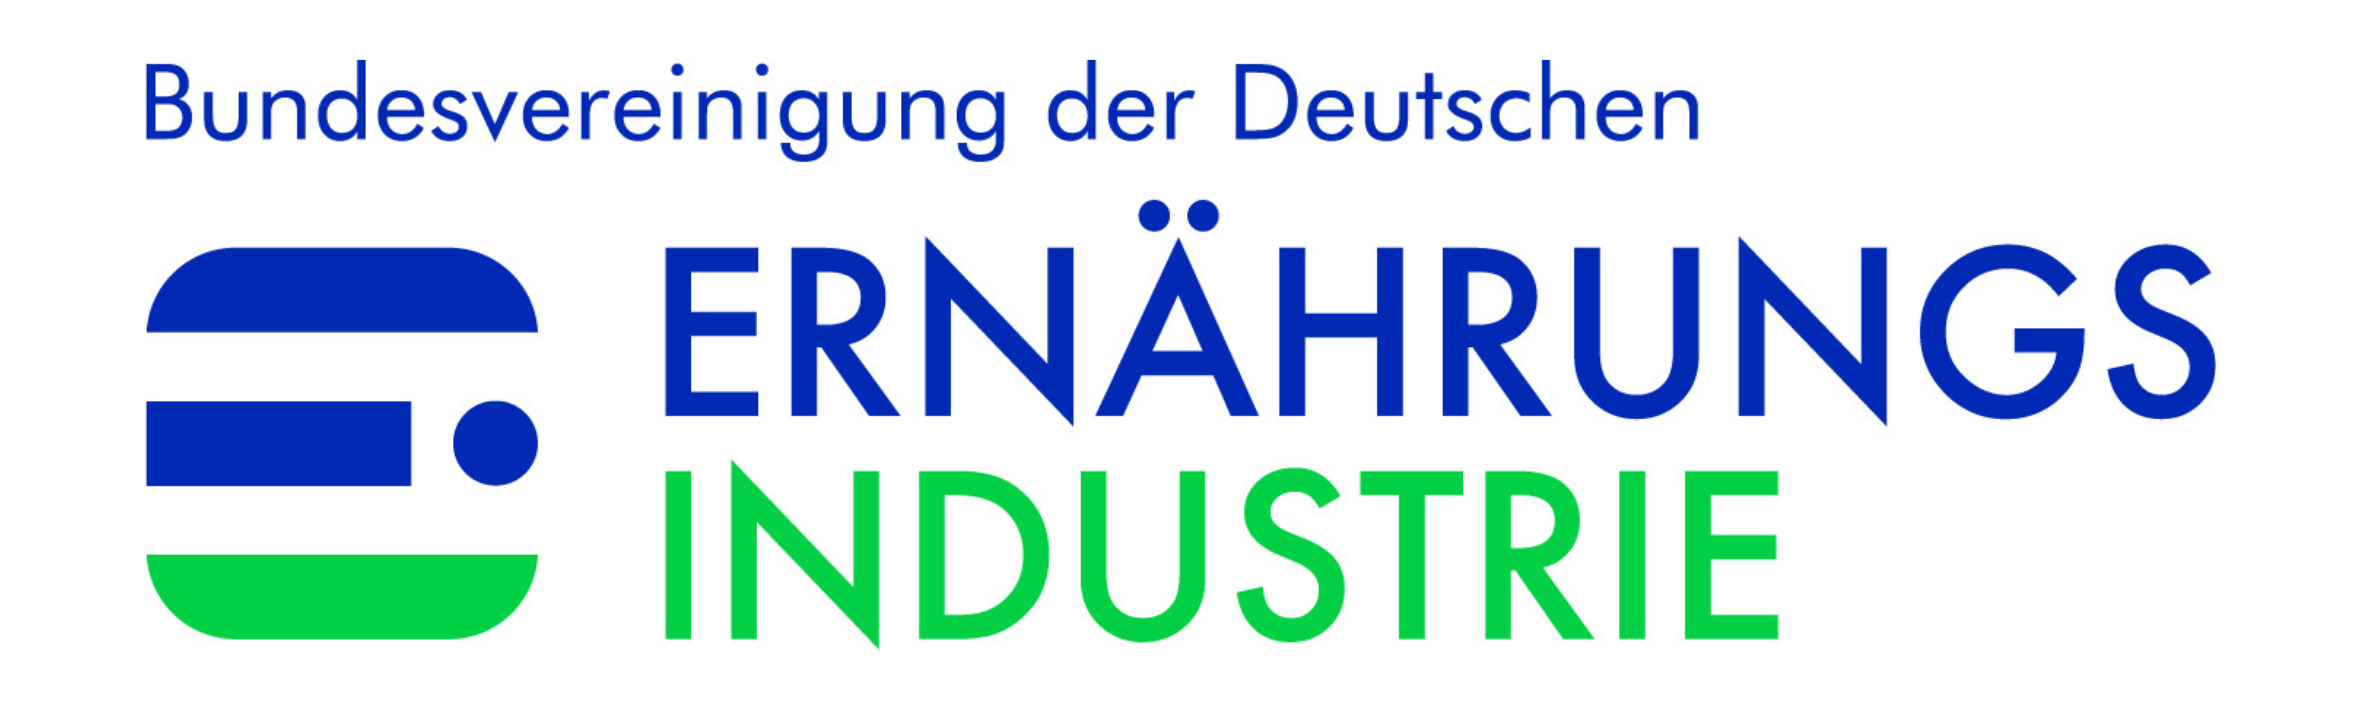 Logo of the Federation of German Food and Drink Industries.